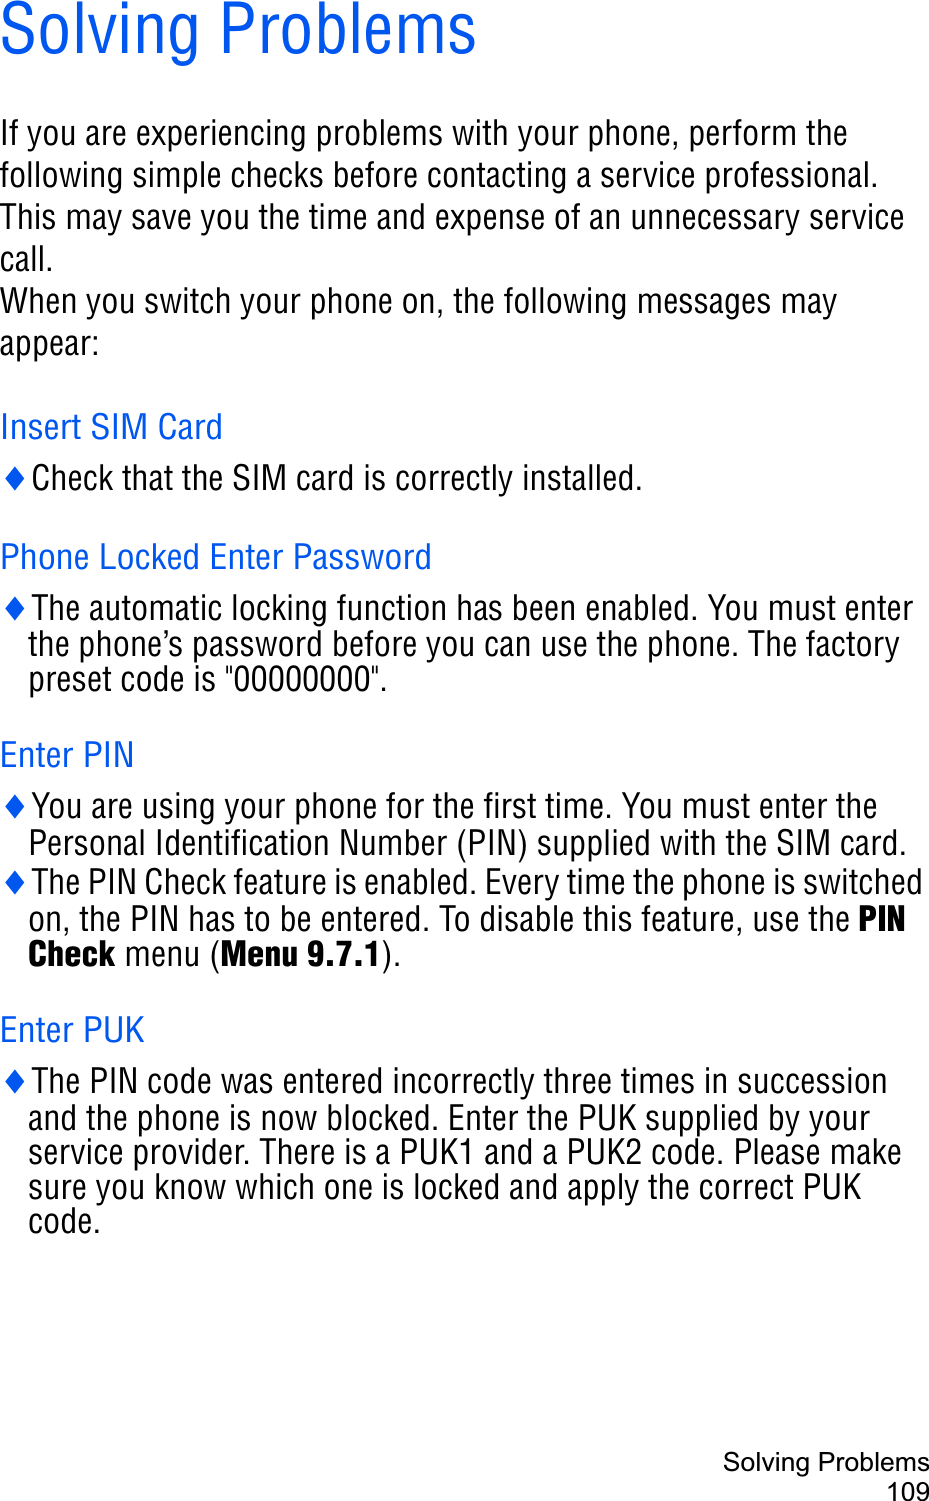 Solving Problems109Solving ProblemsIf you are experiencing problems with your phone, perform the following simple checks before contacting a service professional. This may save you the time and expense of an unnecessary service call.When you switch your phone on, the following messages may appear:Insert SIM CardiCheck that the SIM card is correctly installed.Phone Locked Enter PasswordiThe automatic locking function has been enabled. You must enter the phone’s password before you can use the phone. The factory preset code is &quot;00000000&quot;.Enter PINiYou are using your phone for the first time. You must enter the Personal Identification Number (PIN) supplied with the SIM card.iThe PIN Check feature is enabled. Every time the phone is switched on, the PIN has to be entered. To disable this feature, use the PIN Check menu (Menu 9.7.1).Enter PUKiThe PIN code was entered incorrectly three times in succession and the phone is now blocked. Enter the PUK supplied by your service provider. There is a PUK1 and a PUK2 code. Please make sure you know which one is locked and apply the correct PUK code.